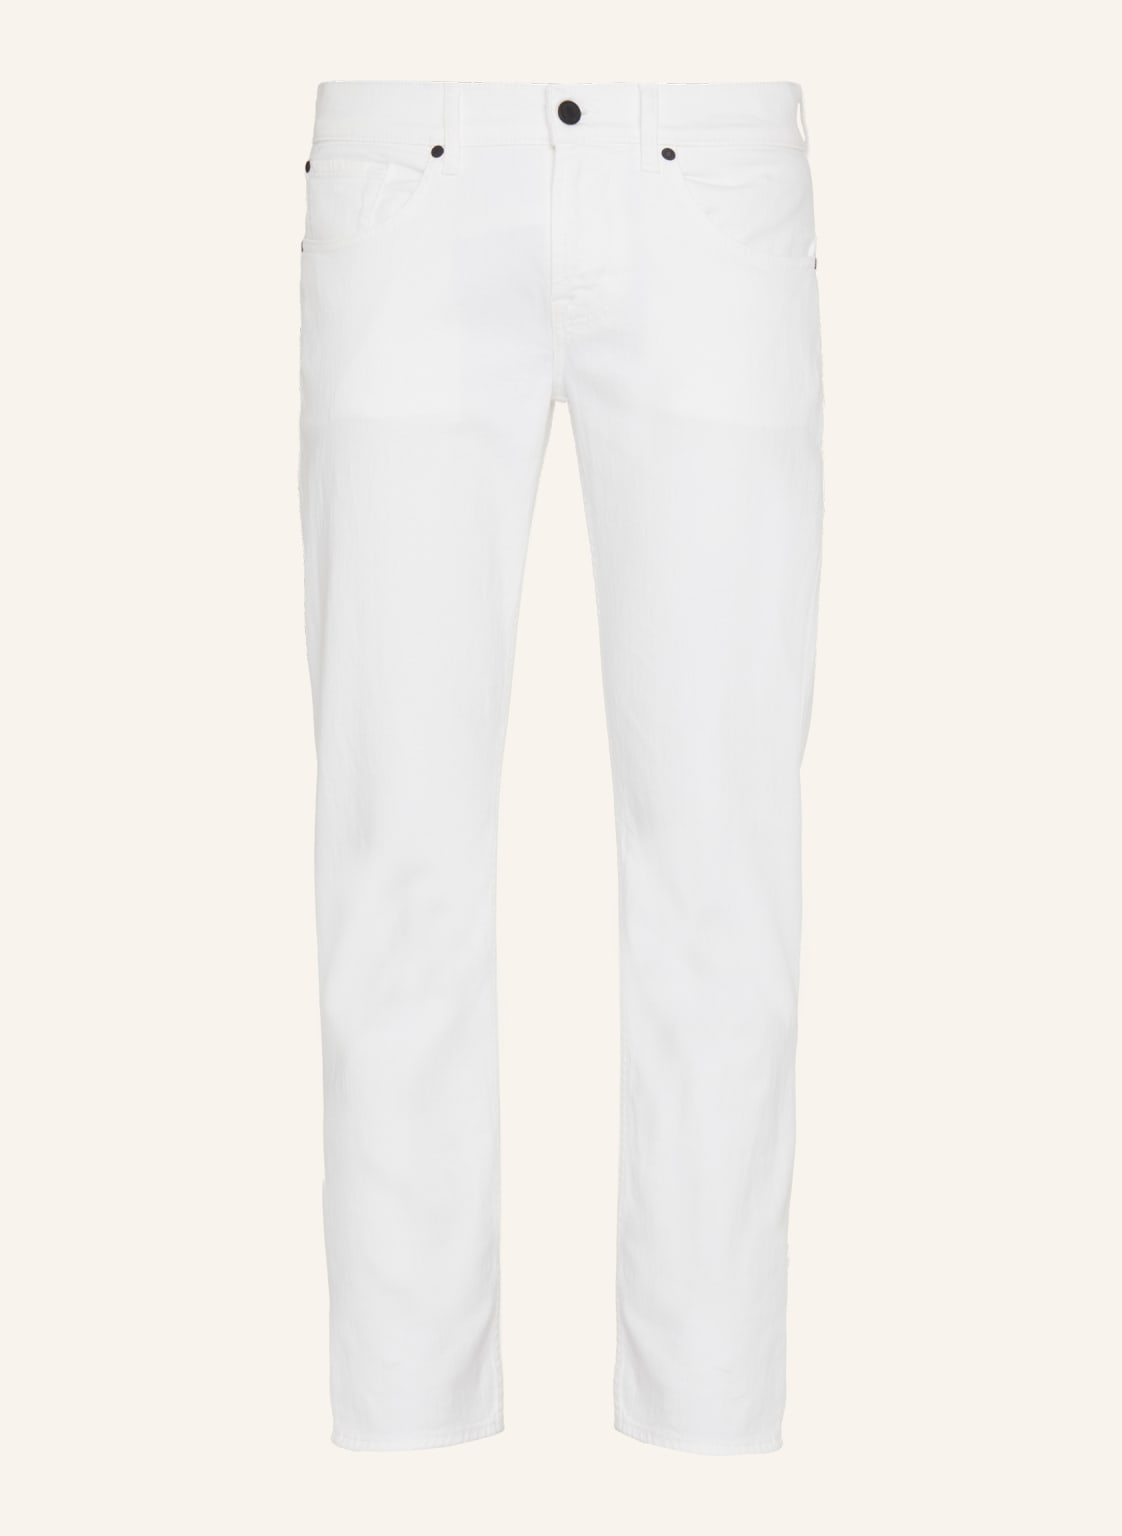 7 For All Mankind Jeans Slimmy Tapered Slim Fit weiss von 7 For All Mankind